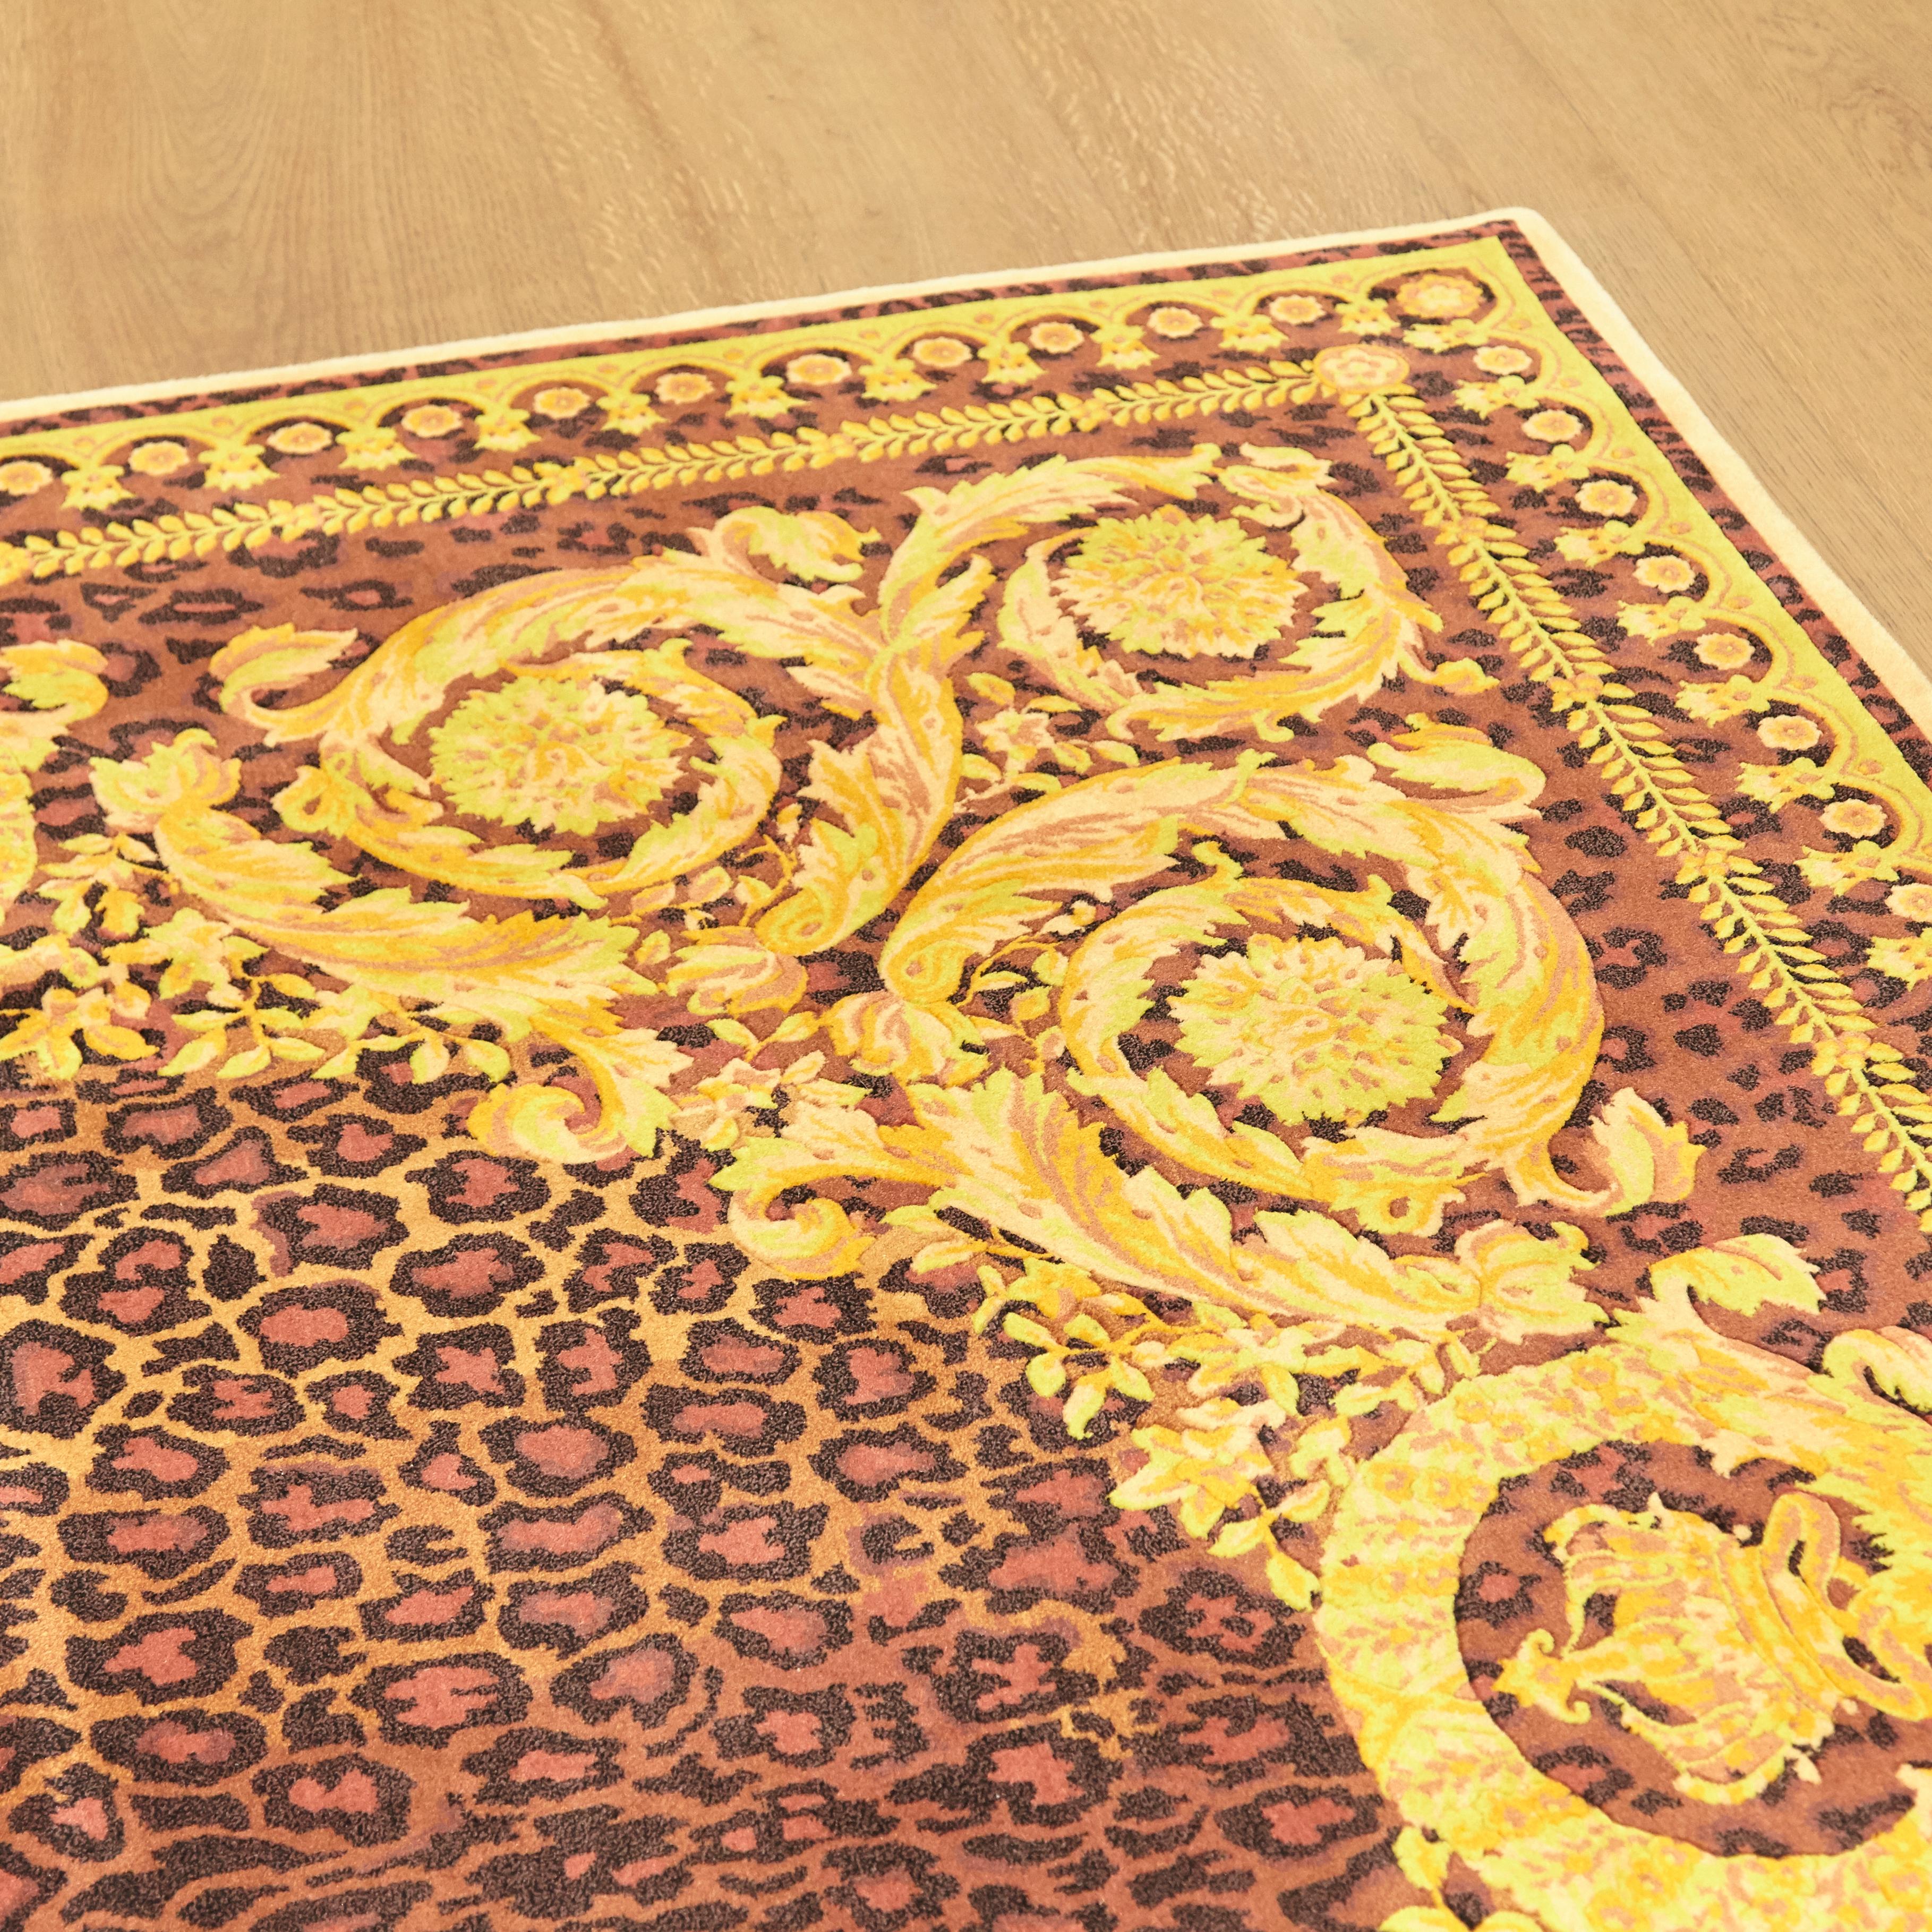 Gianni Versace Collection Rug Wild Barocco, Gold Leopard Animal Print, 1980 1